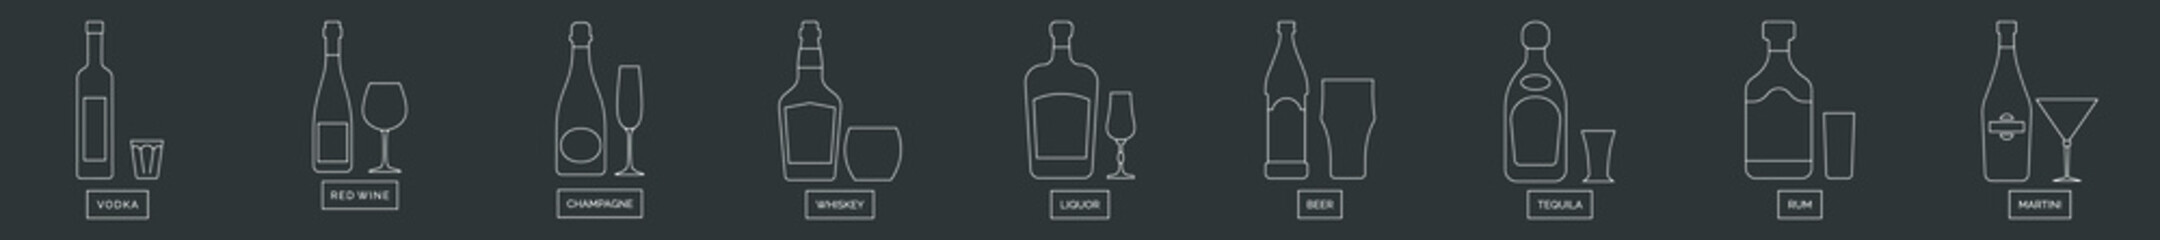 Bottle and glass vodka wine champagne whiskey liquor beer tequila rum martini line art in flat style. Alcoholic illustration on black background. Isolated contour element. Beverage outline icon.